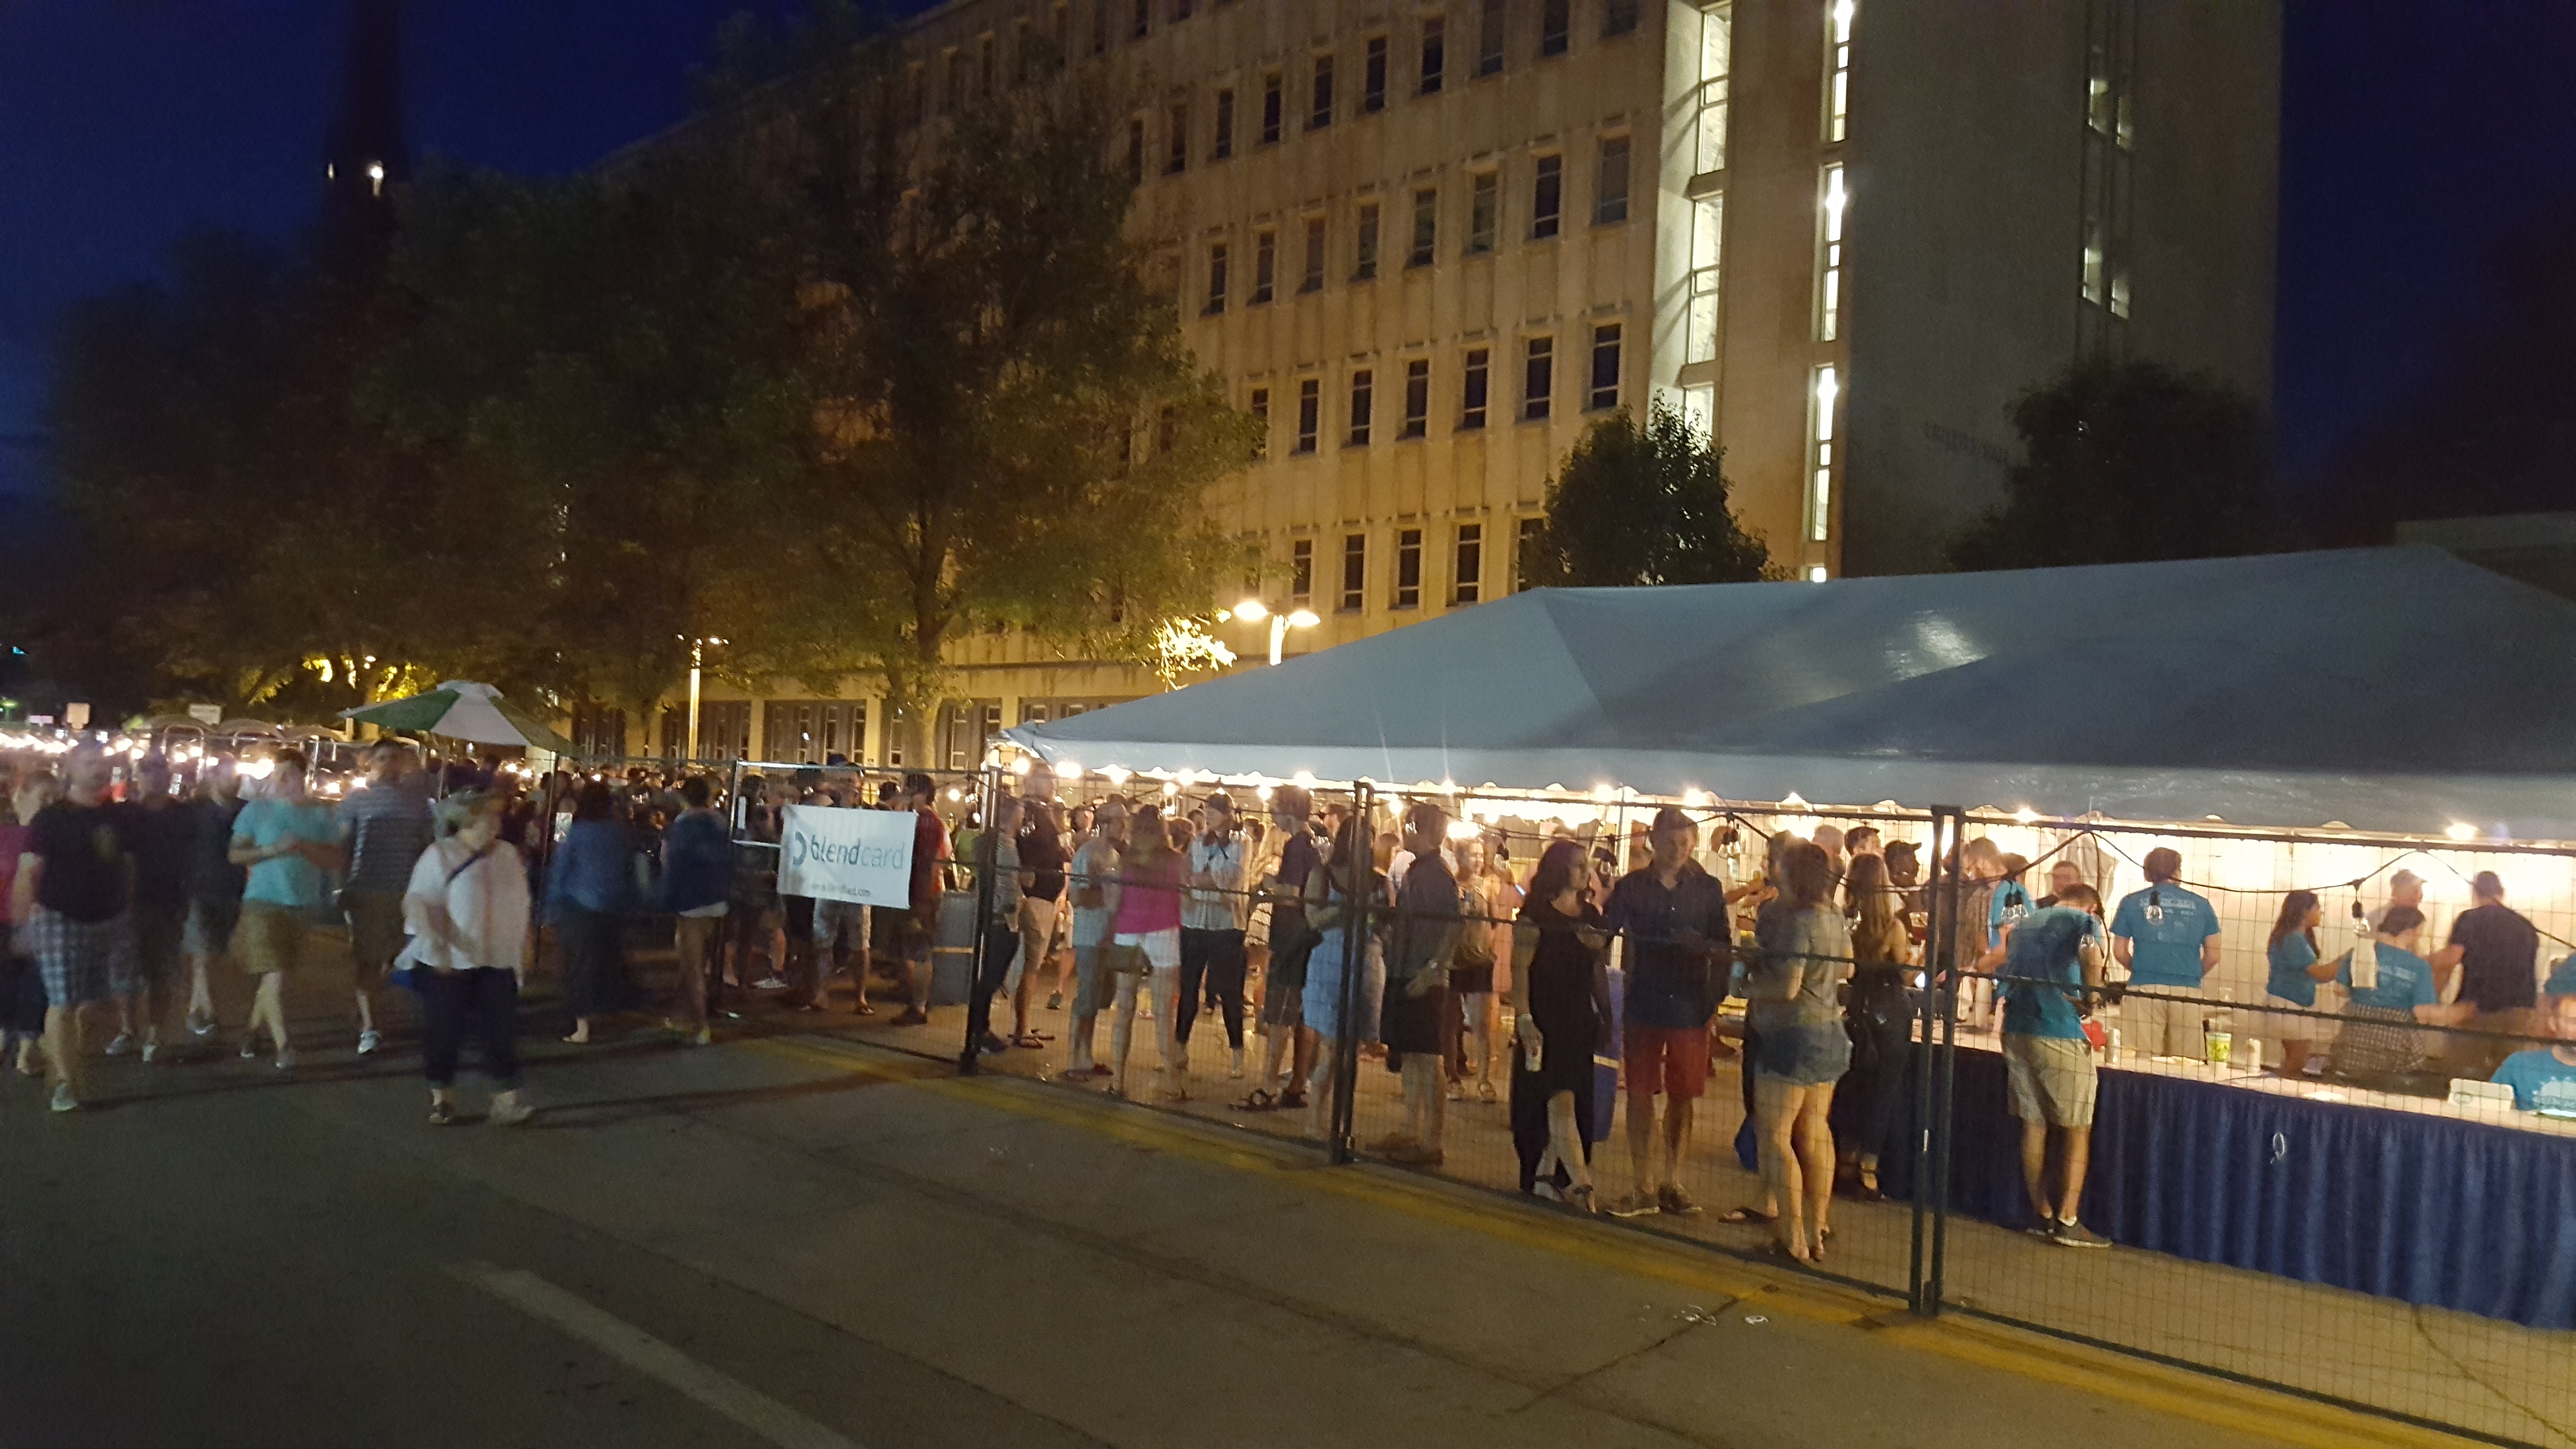 Beer Tent at the Iowa City Jazz Festival 2016